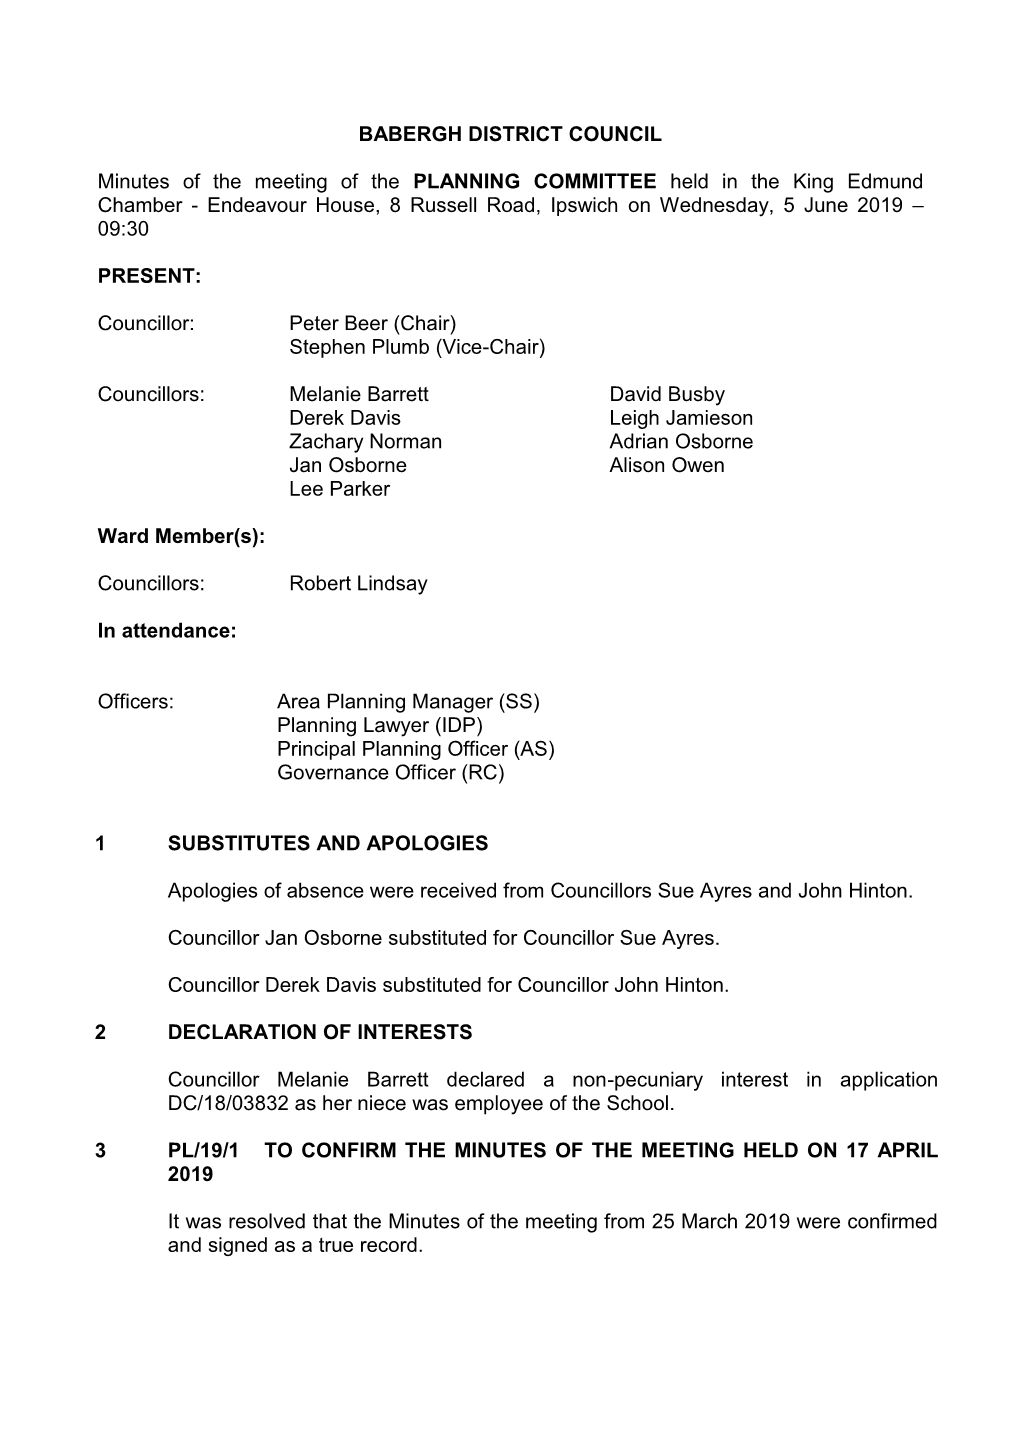 BABERGH DISTRICT COUNCIL Minutes of the Meeting of The